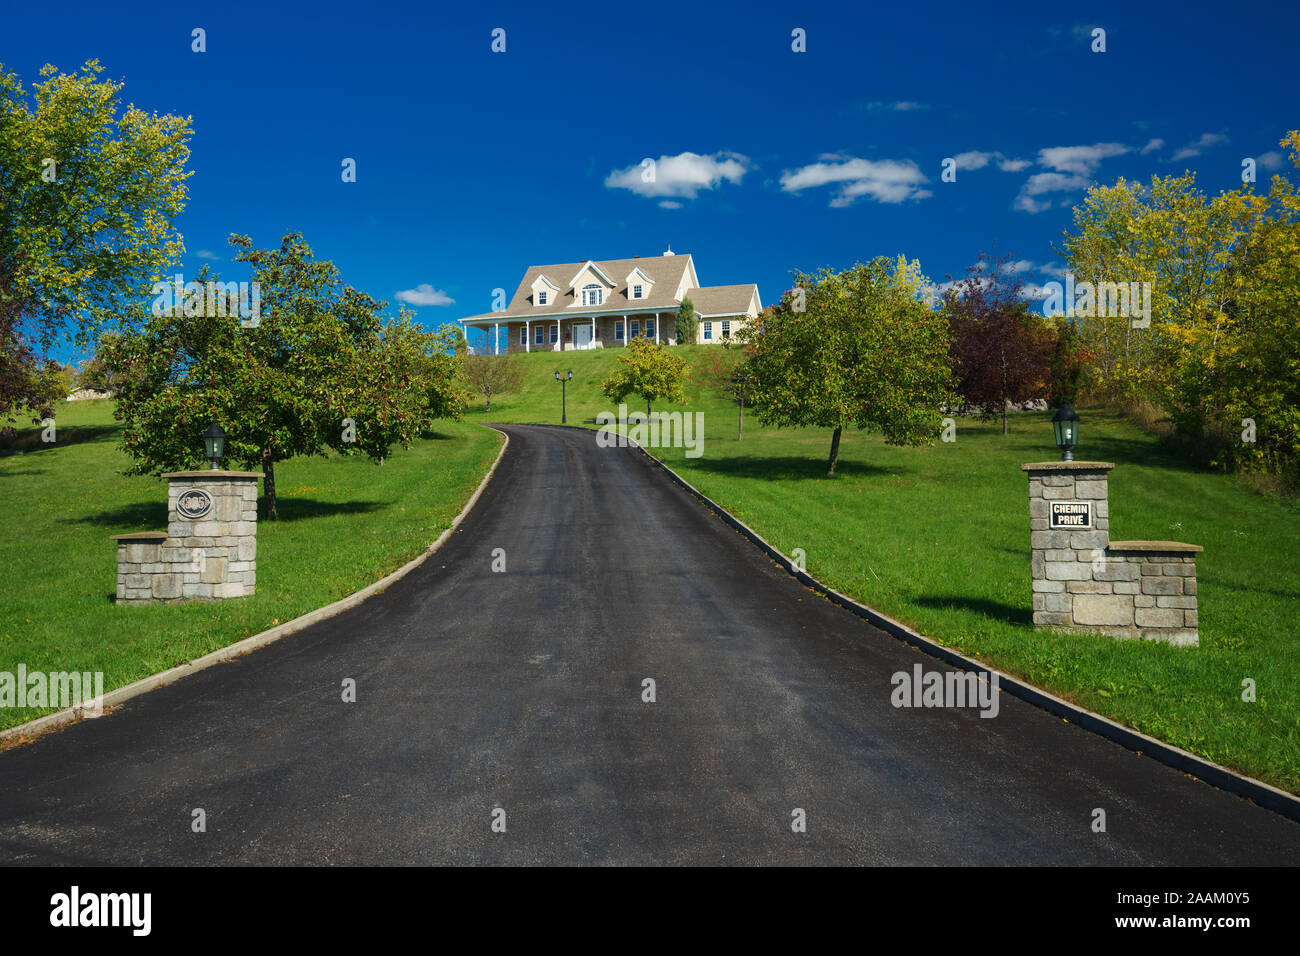 Long paved driveway leading to a house on the hill, Terrebonne, province of Quebec, Canada. Stock Photo